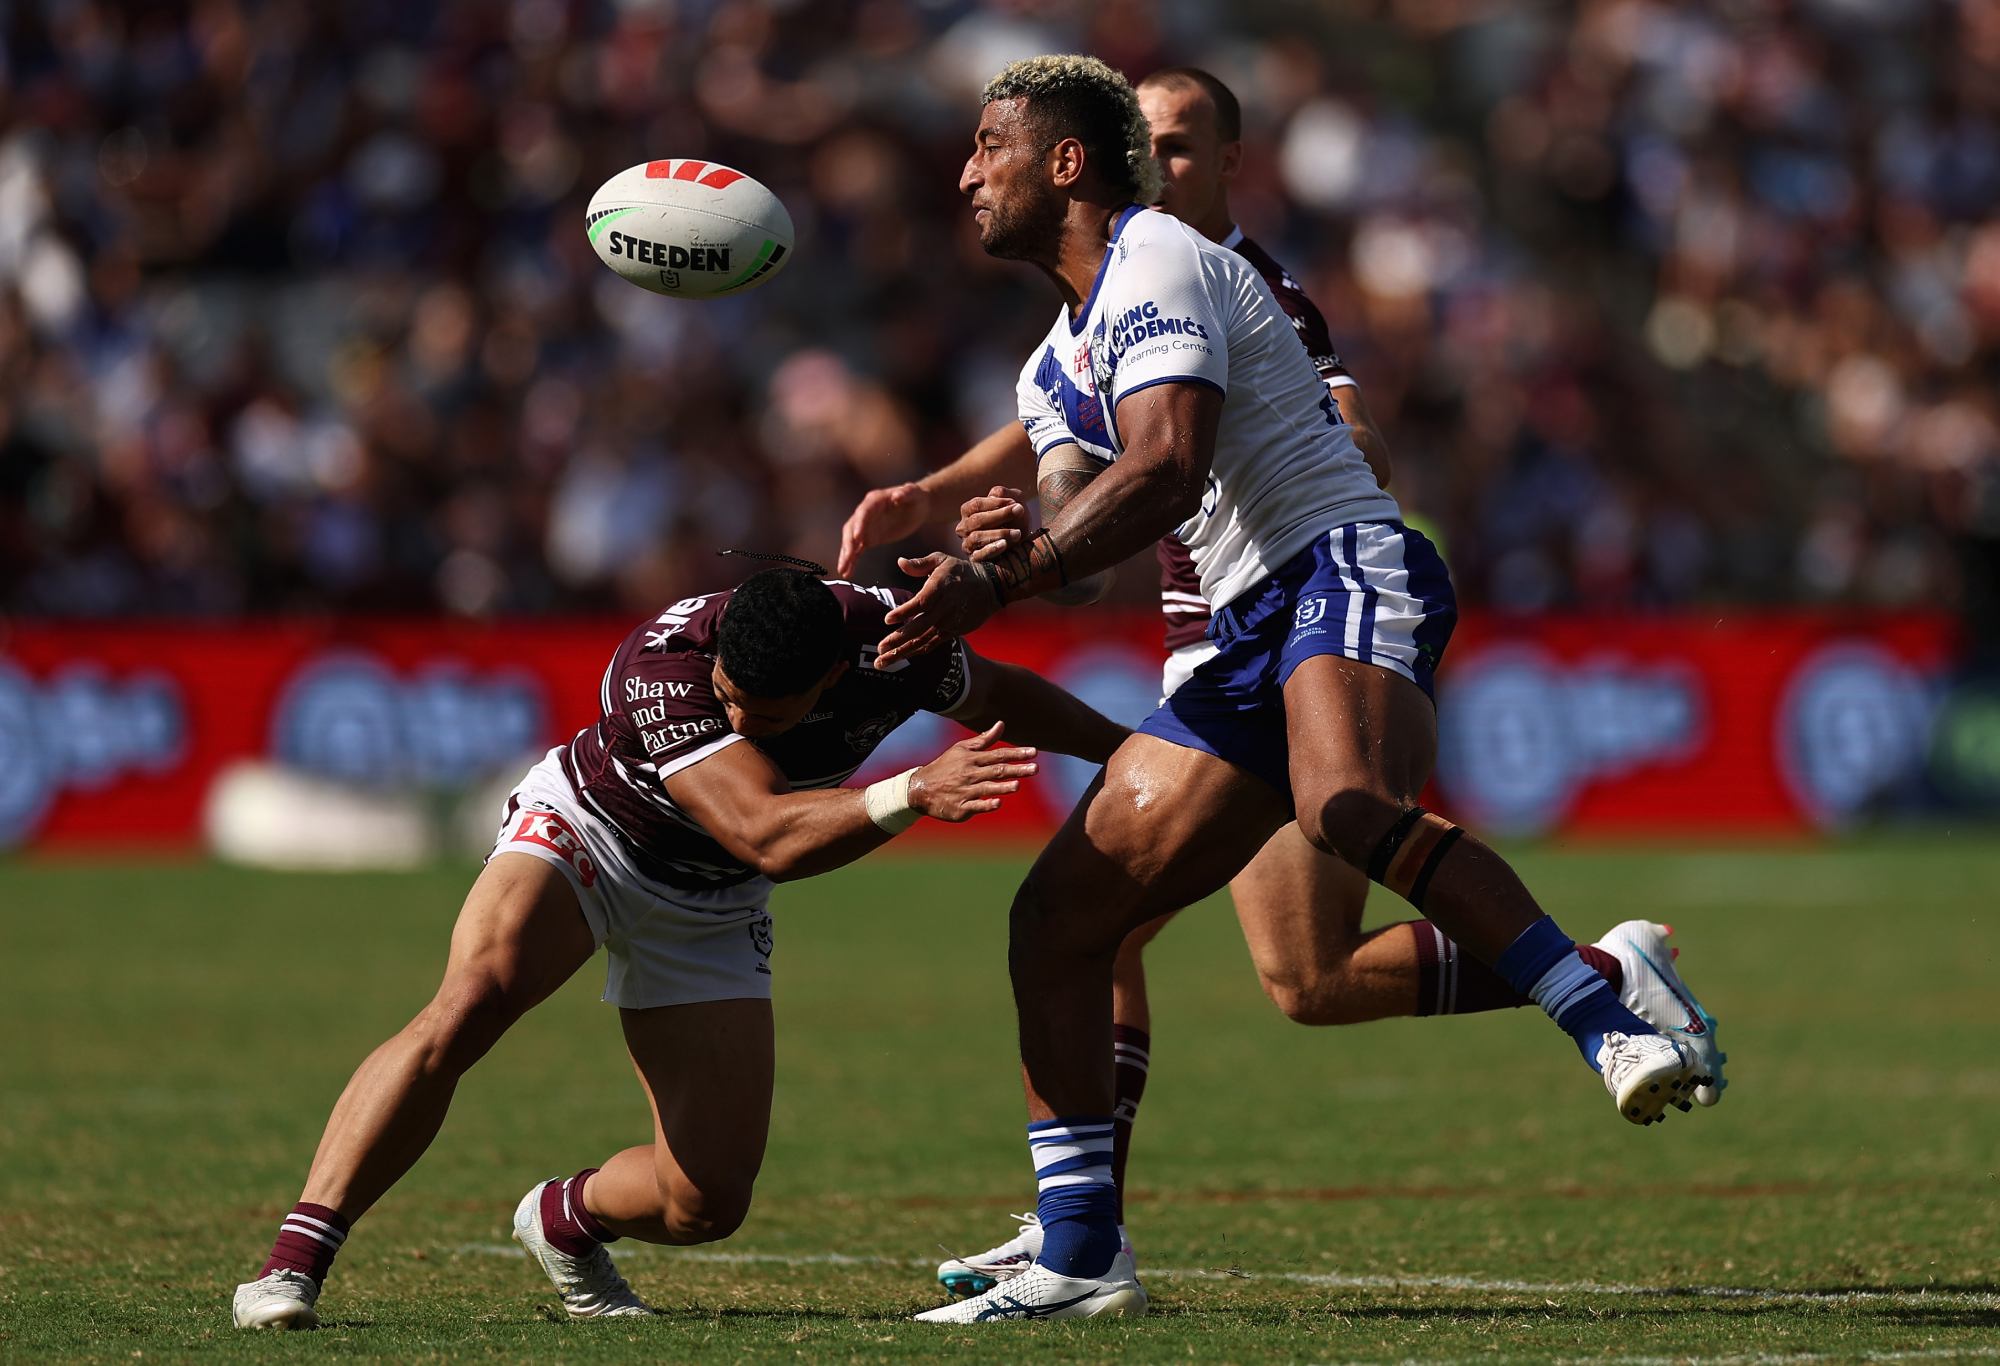 SYDNEY, AUSTRALIA - MARCH 4: Viliame Kikau of the Bulldogs is tackled during the NRL first round game between the Manly Sea Eagles and the Canterbury Bulldogs at 4 Pines Park on March 4, 2023 in Sydney, Australia. (Photo by Cameron Spencer/Getty Images)